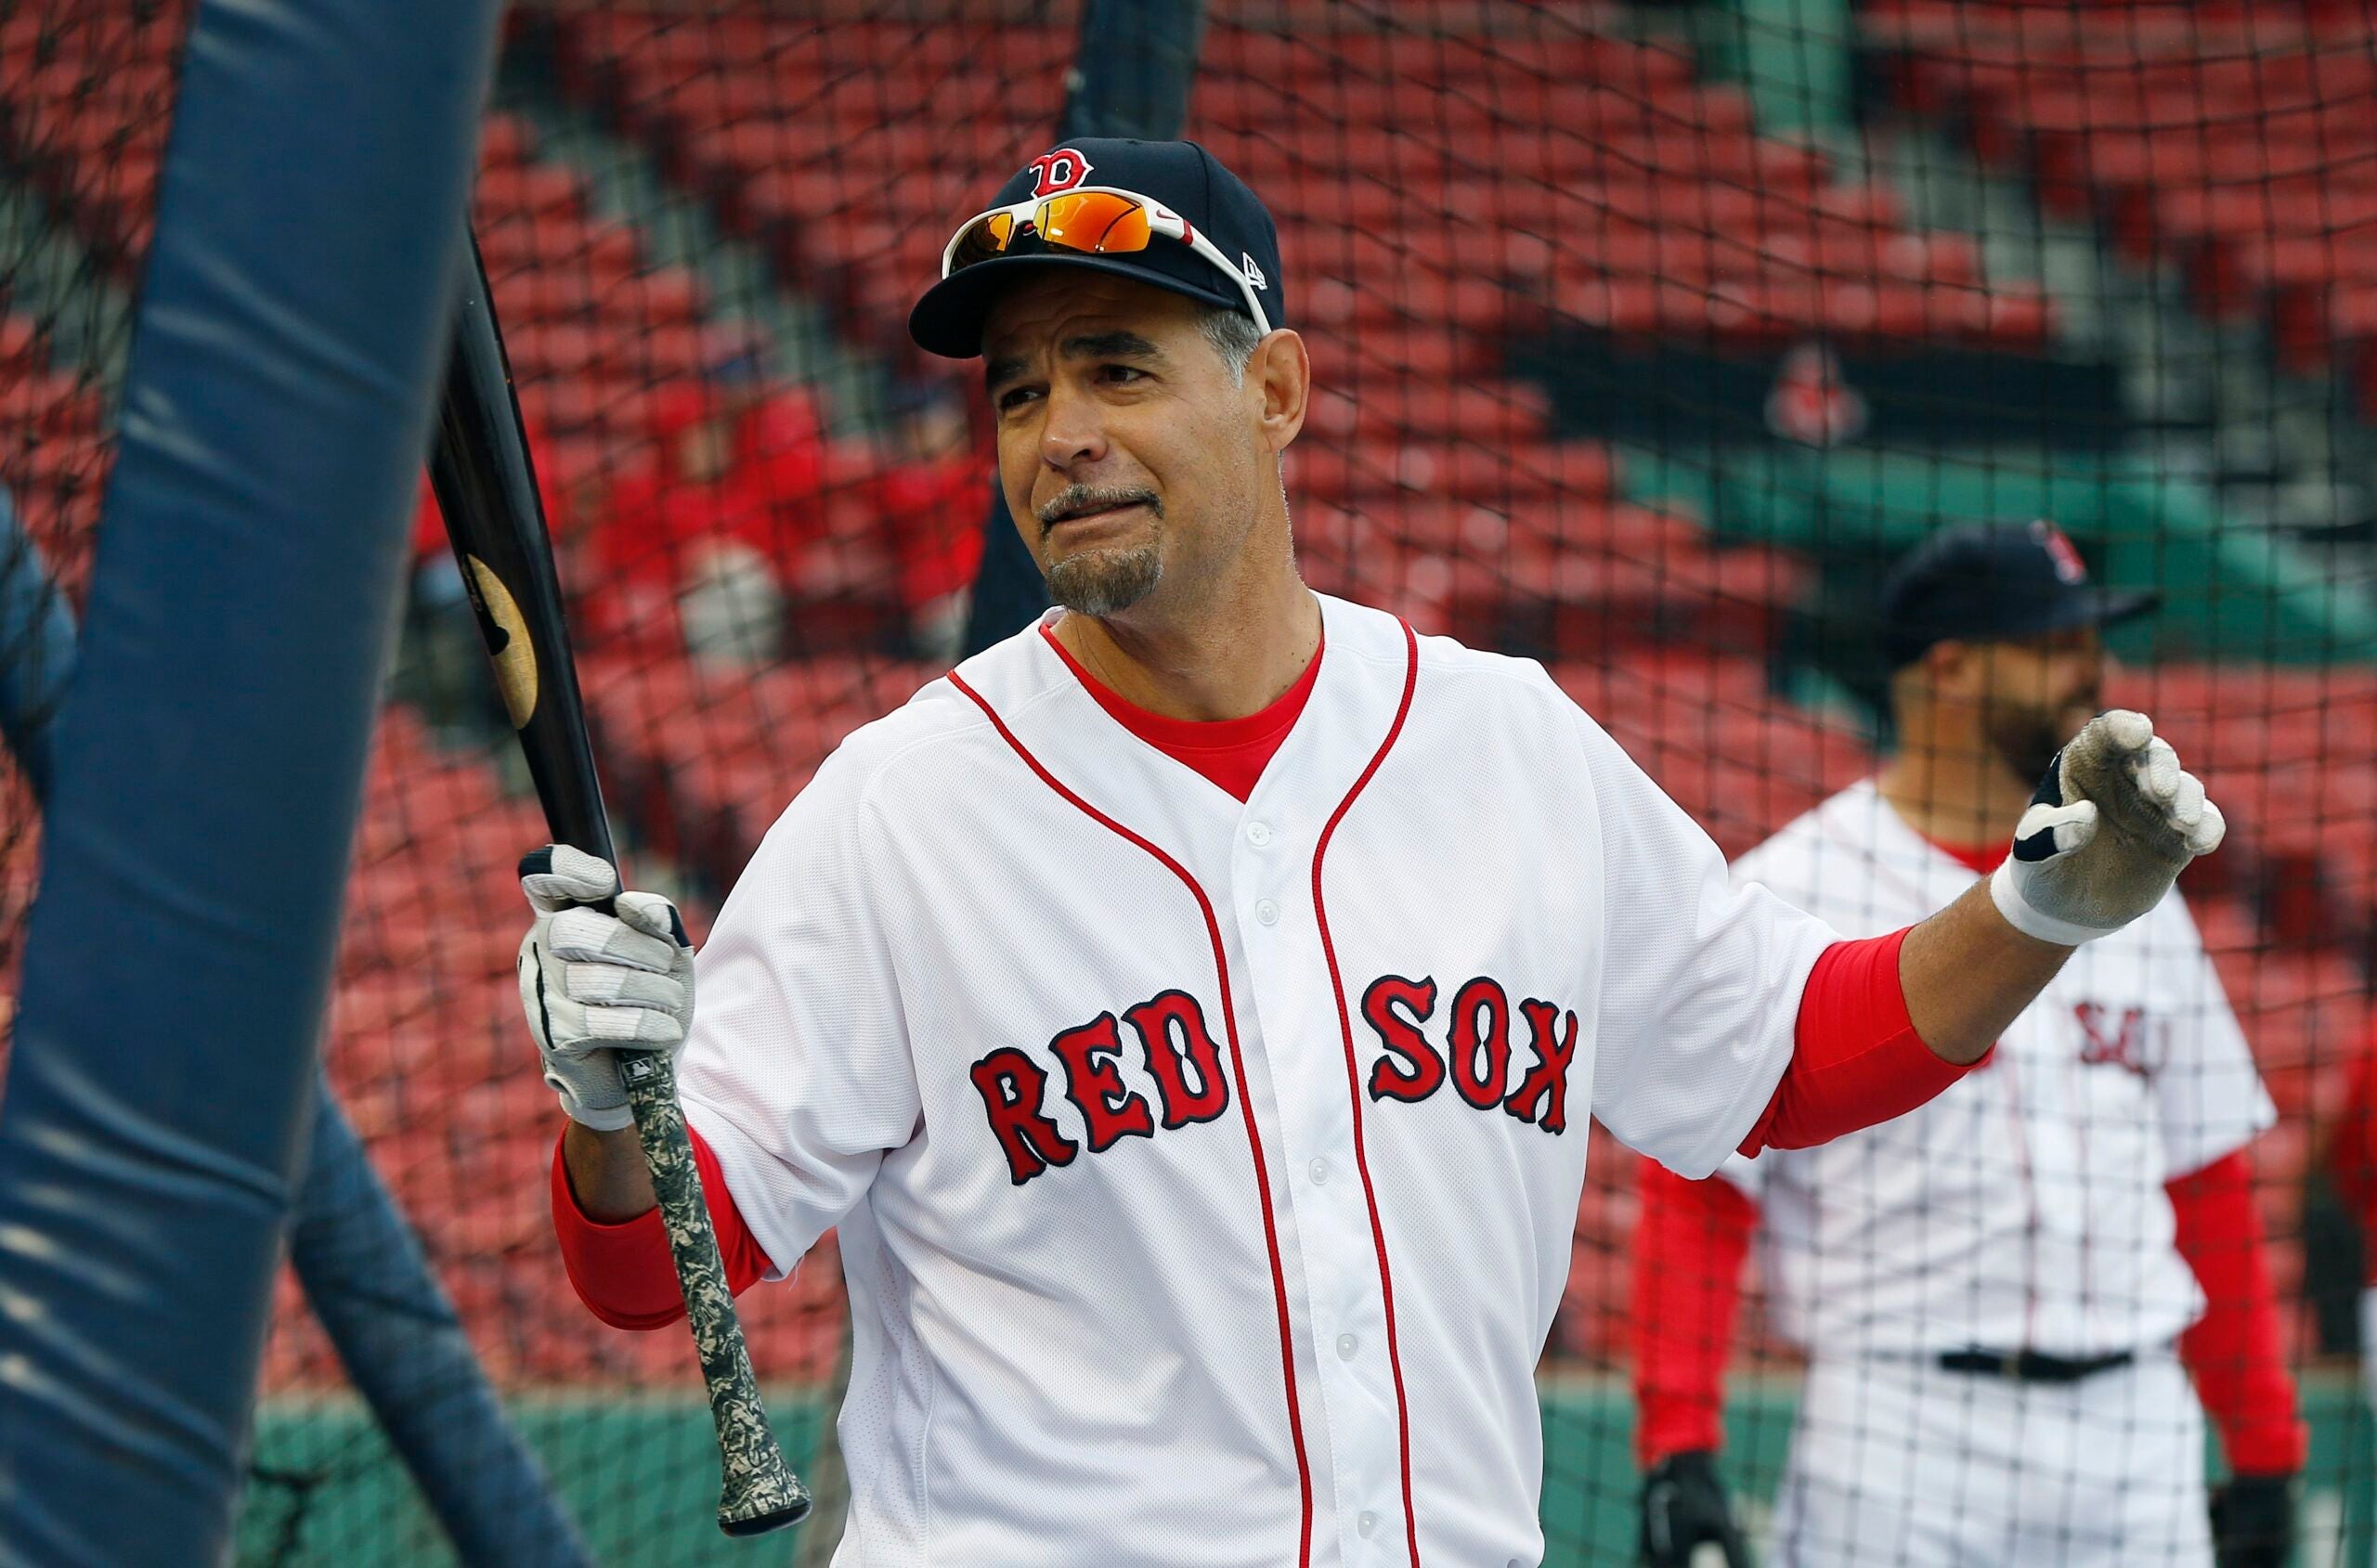 Red Sox Hall of Famer Mike Lowell shares that he's 22 years cancer